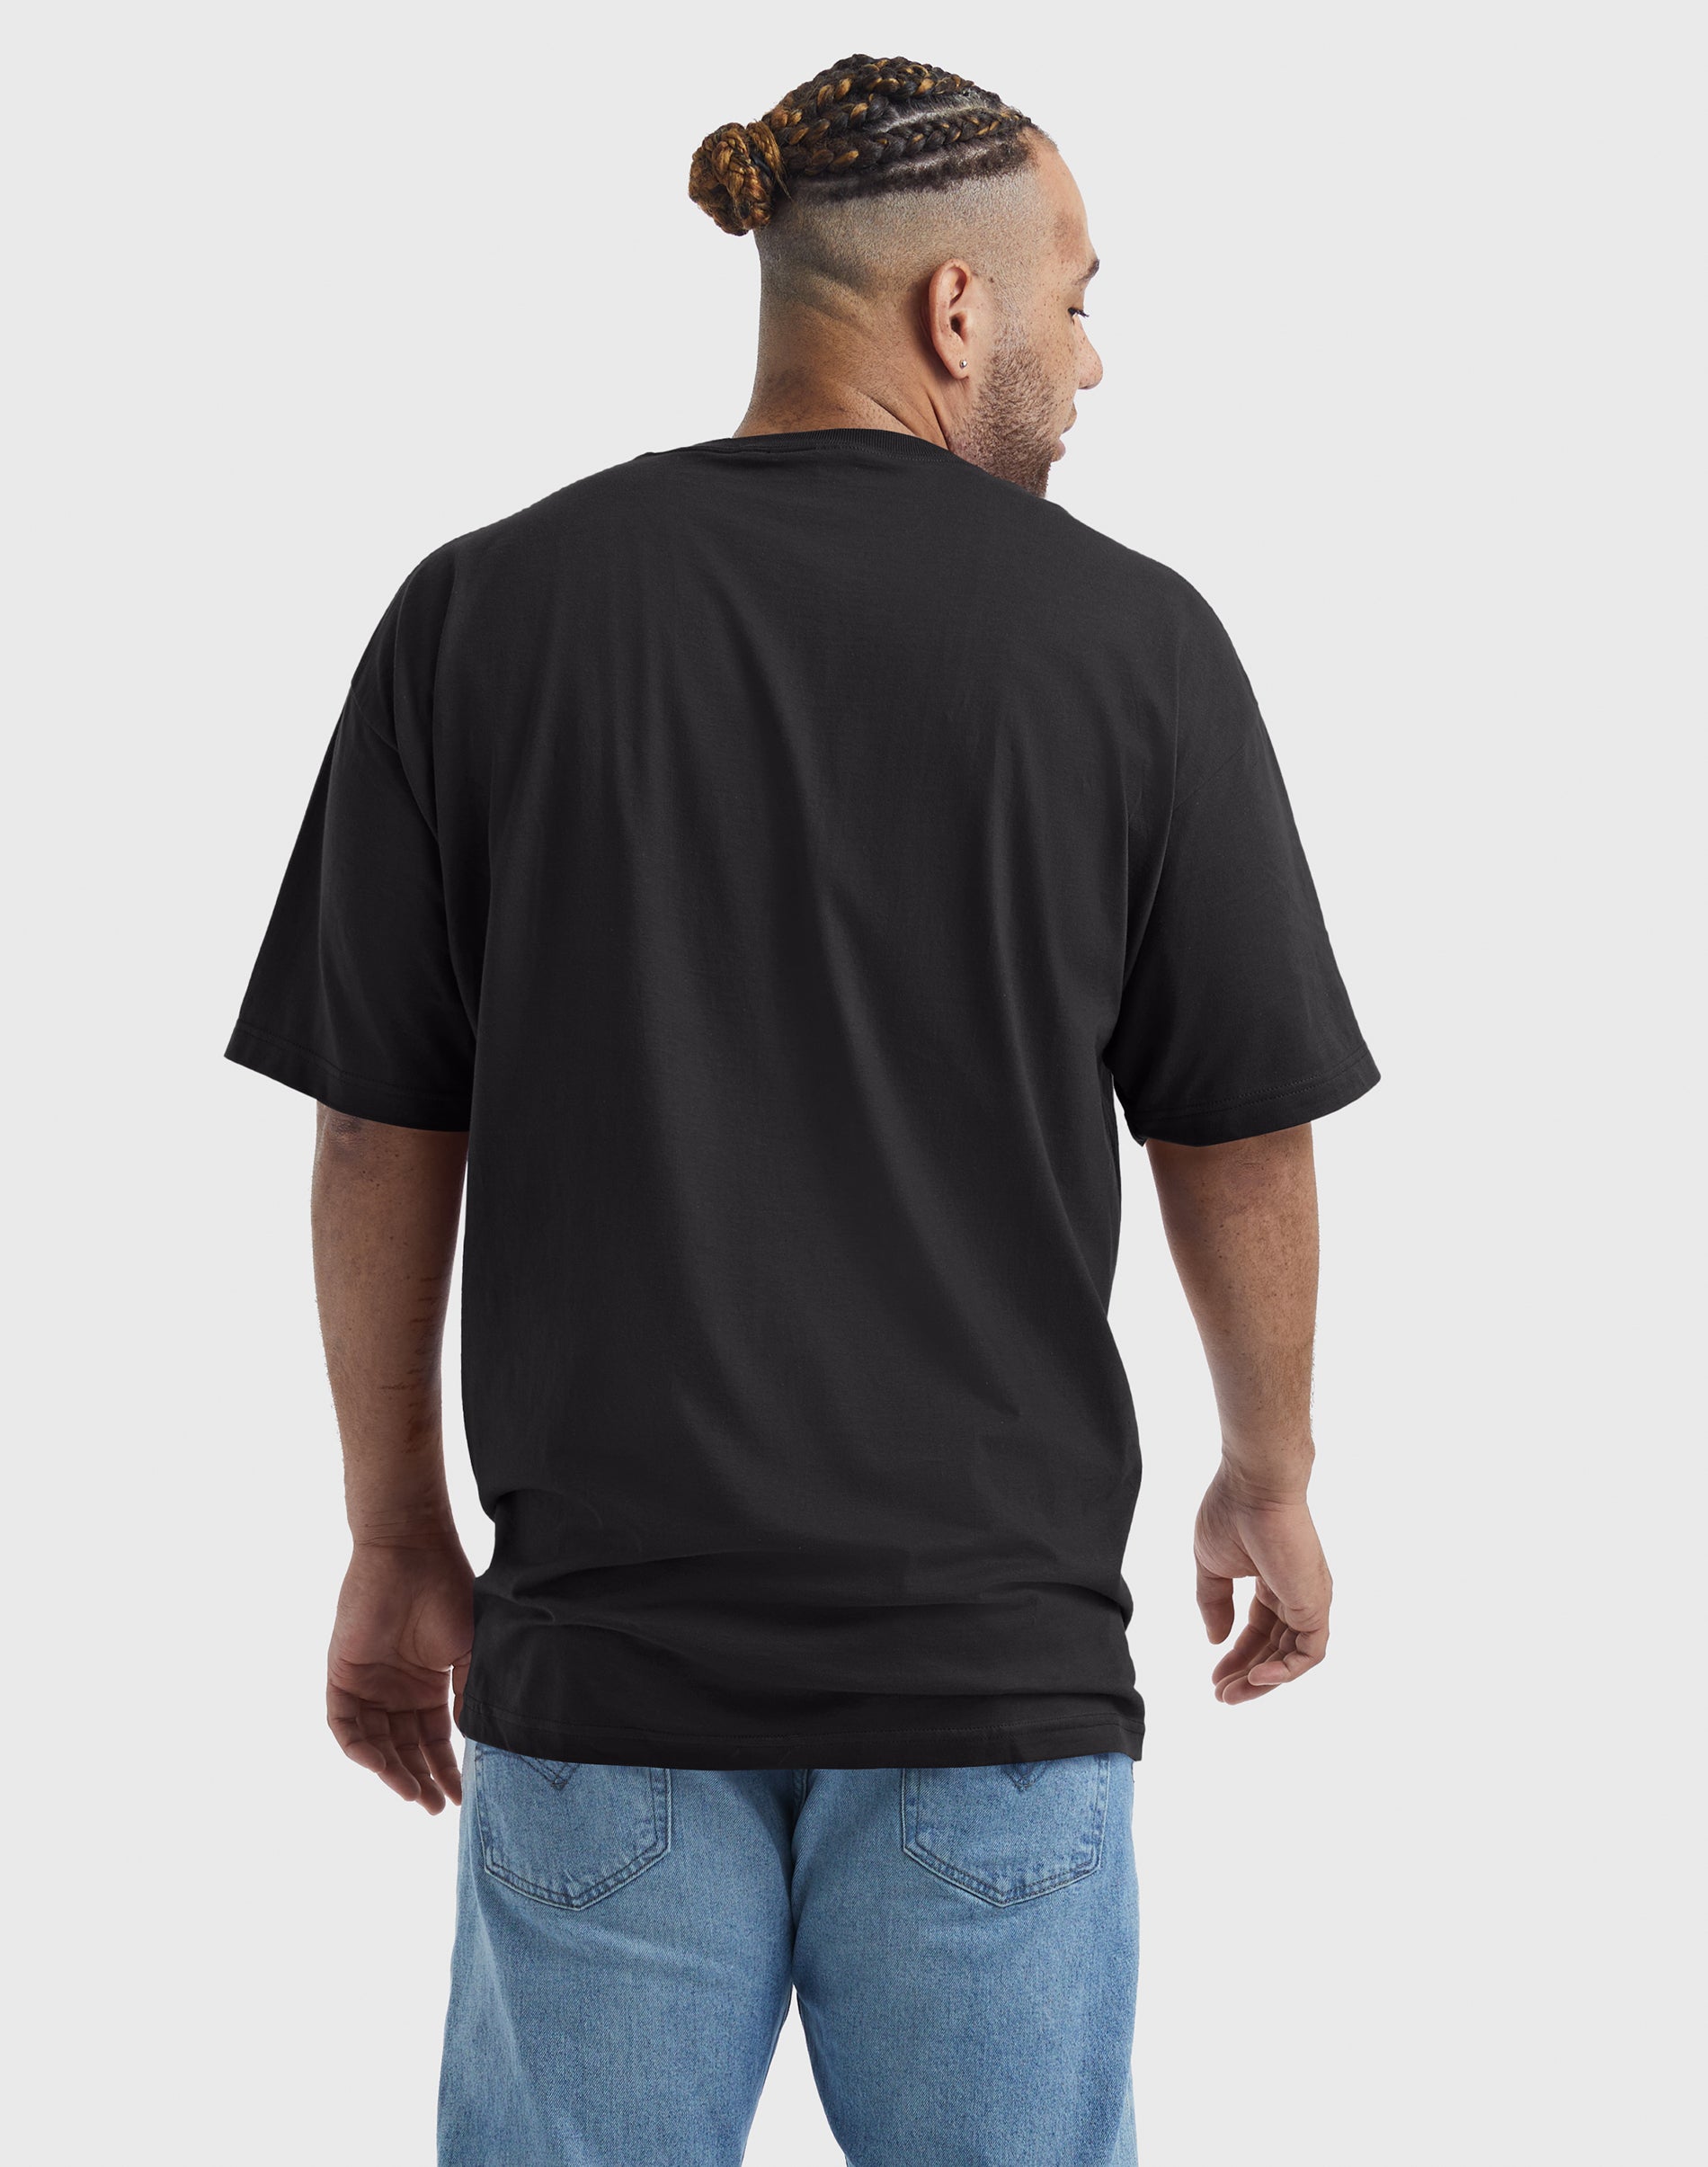 Hanes Big Men's Beefy Heavyweight Short Sleeve T-shirt - Tall Sizes, Up To Size 4XT - image 3 of 4